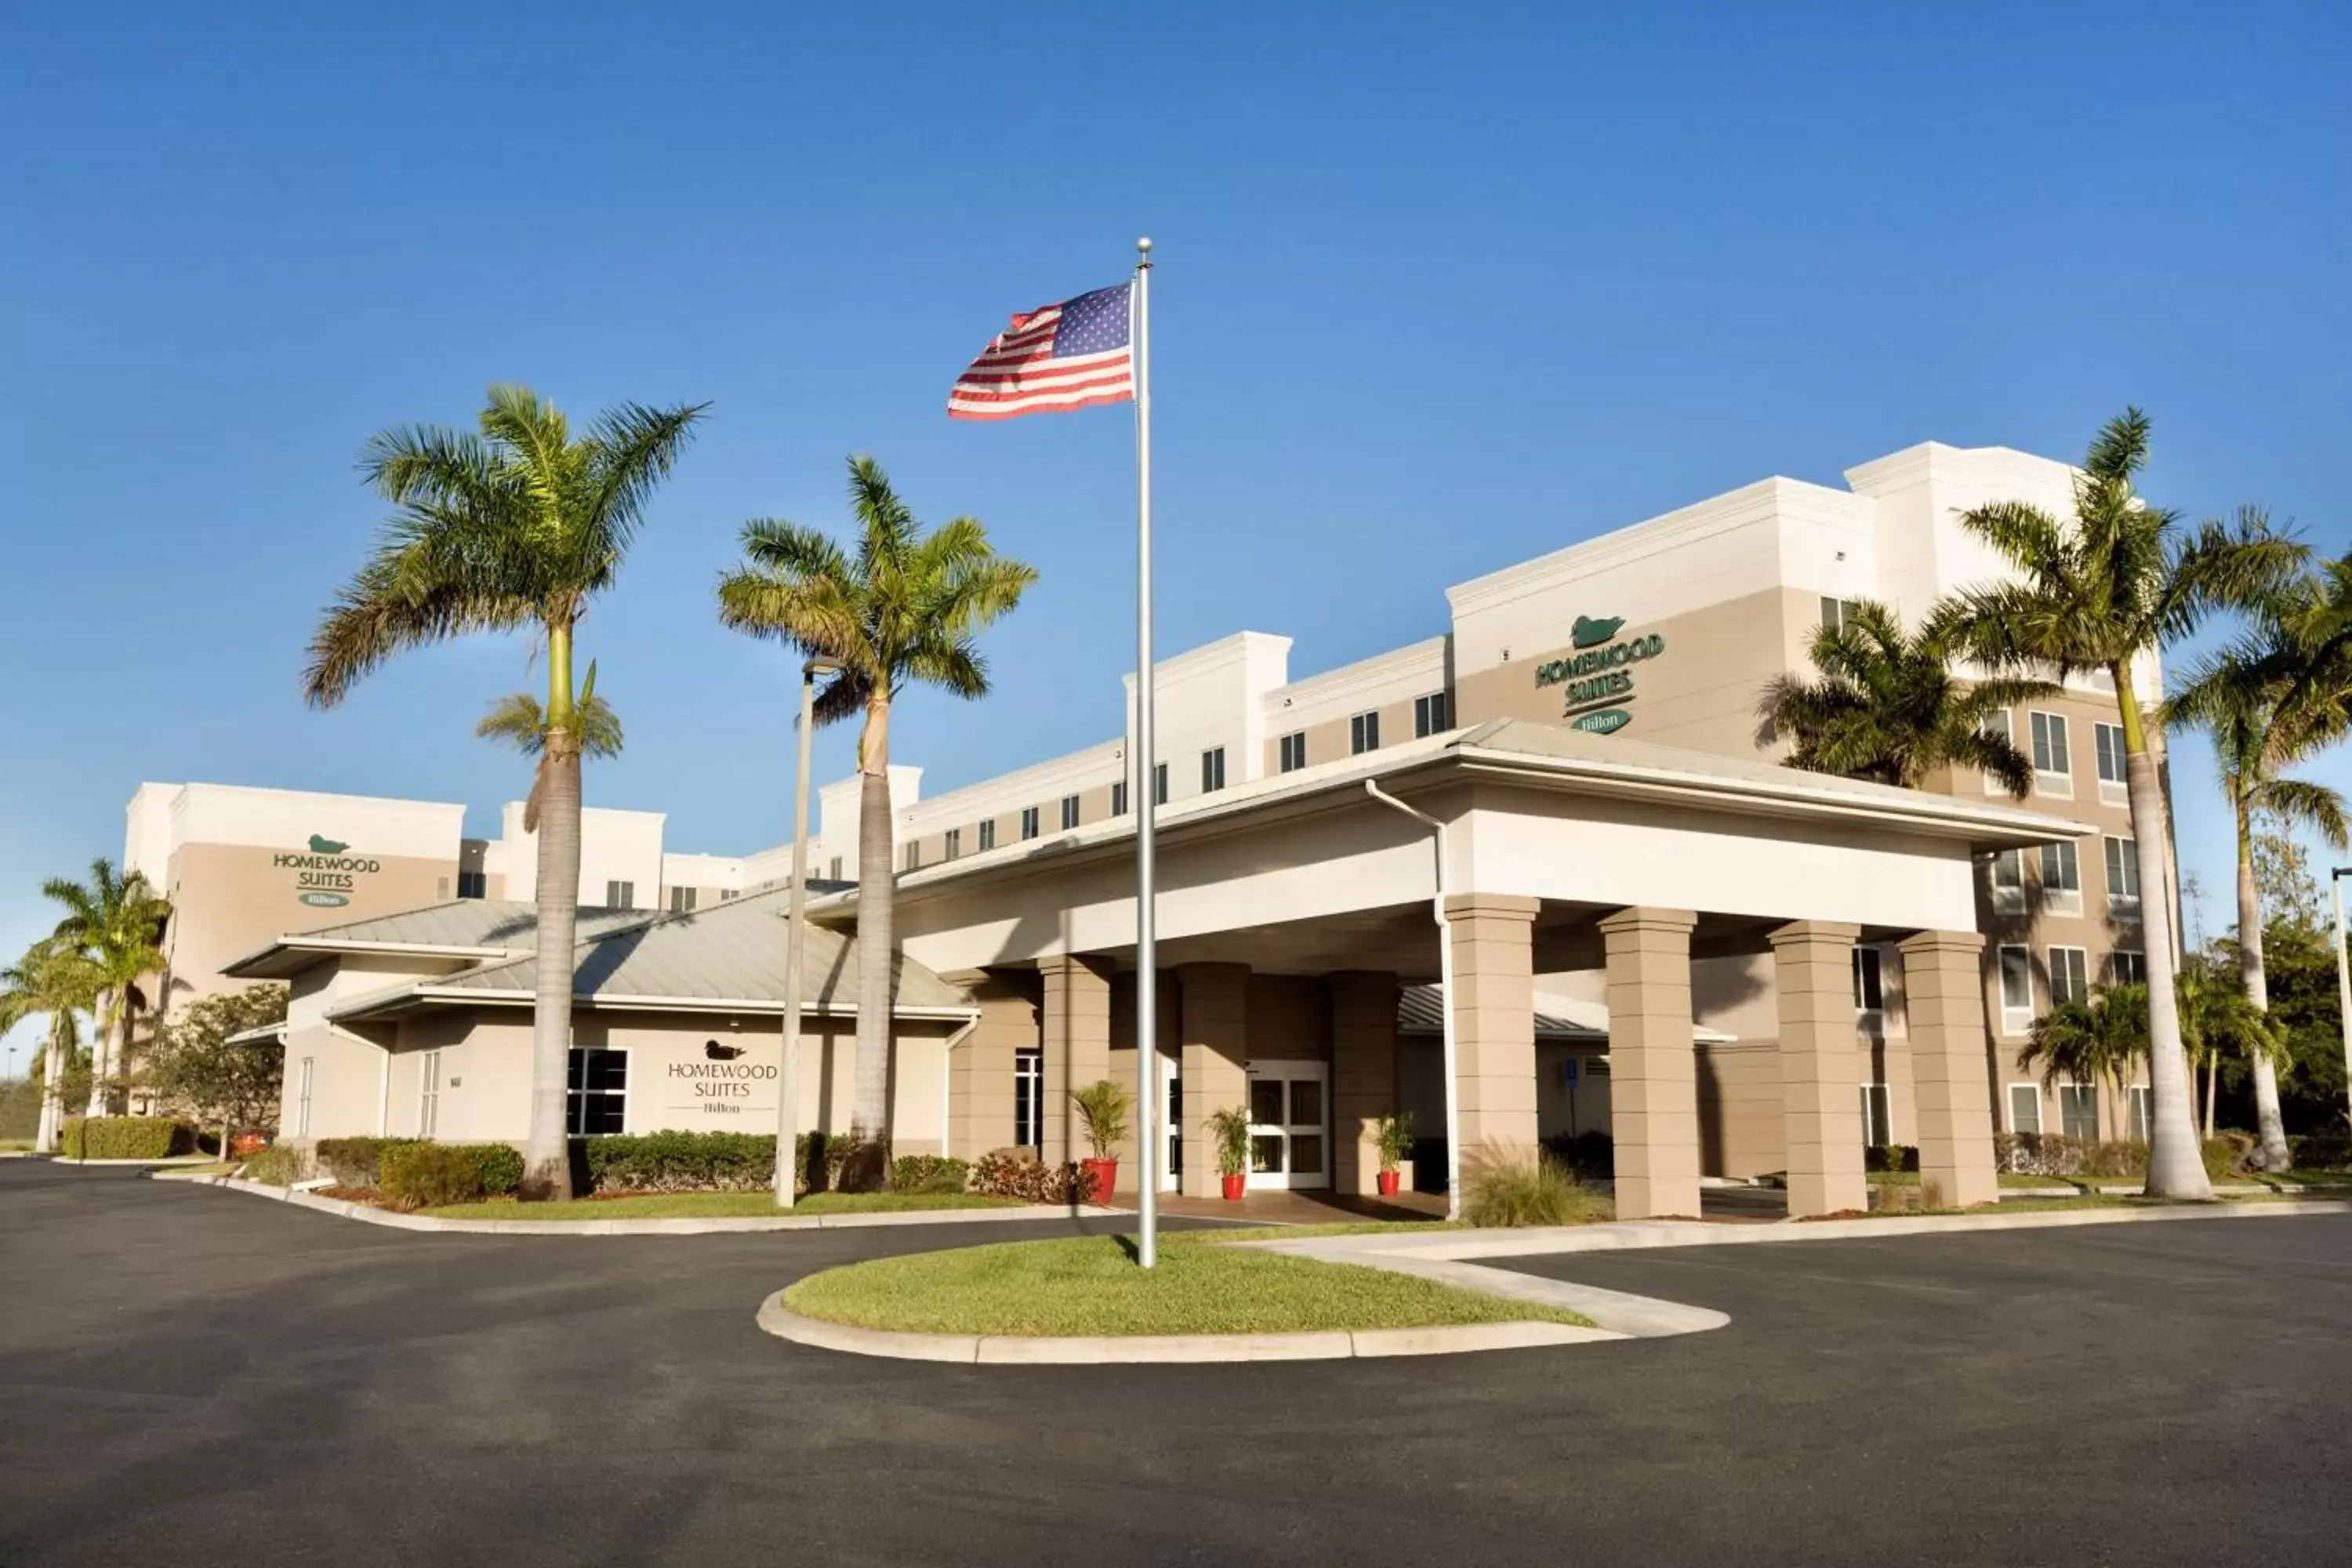 Property Building in Homewood Suites Fort Myers Airport - FGCU